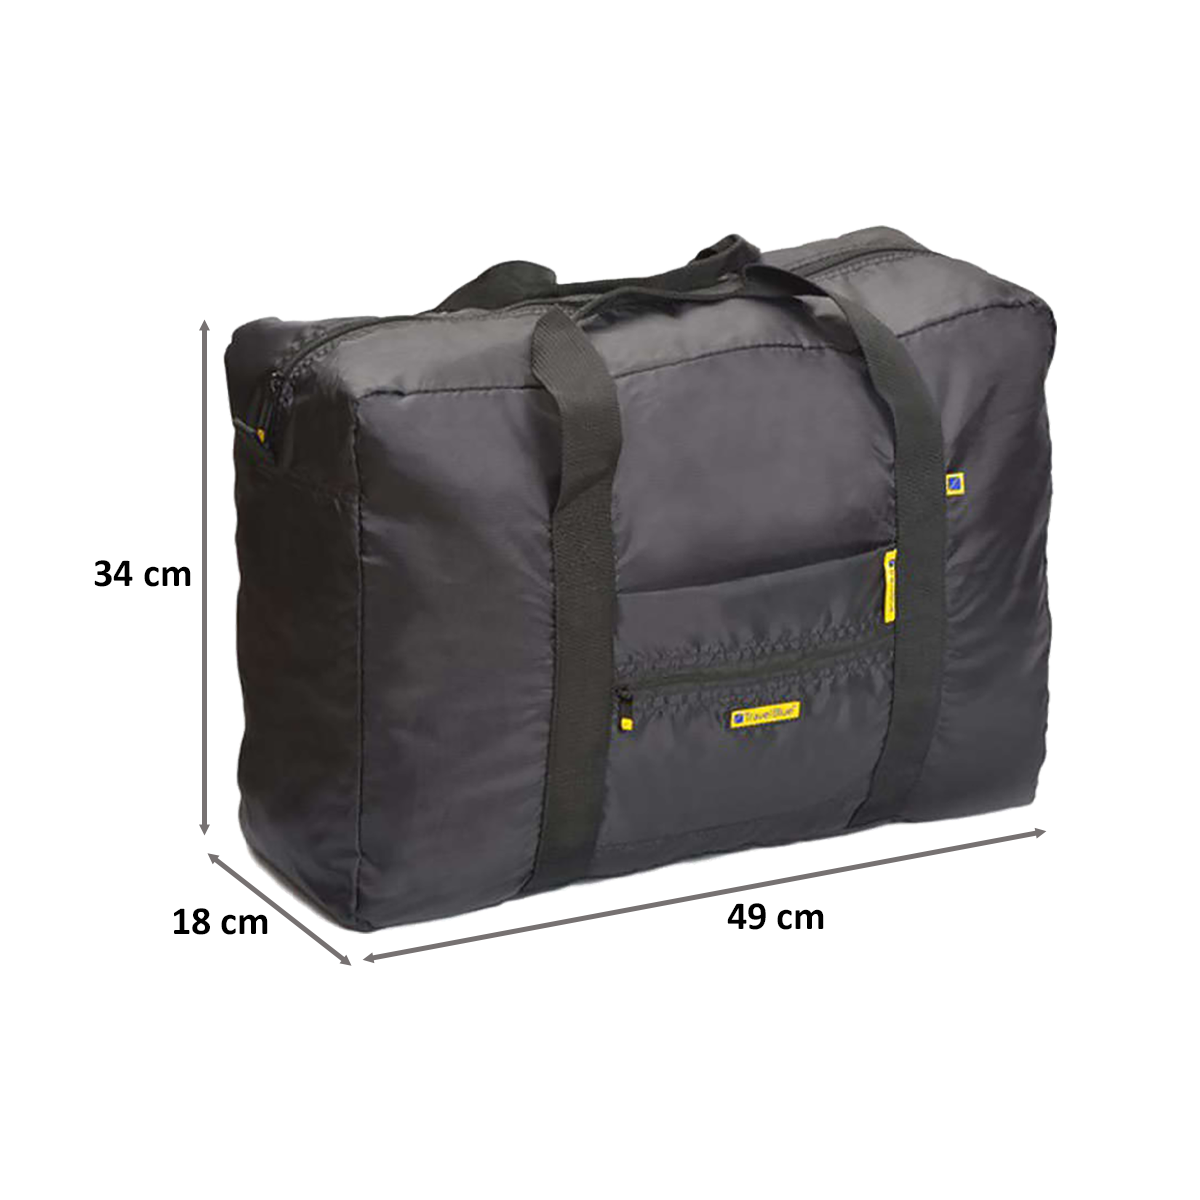 Wol Foldable Travel Bag, Large Capacity Folding Travel Bag, Travel  Lightweight Waterproof Carry Luggage Small Travel